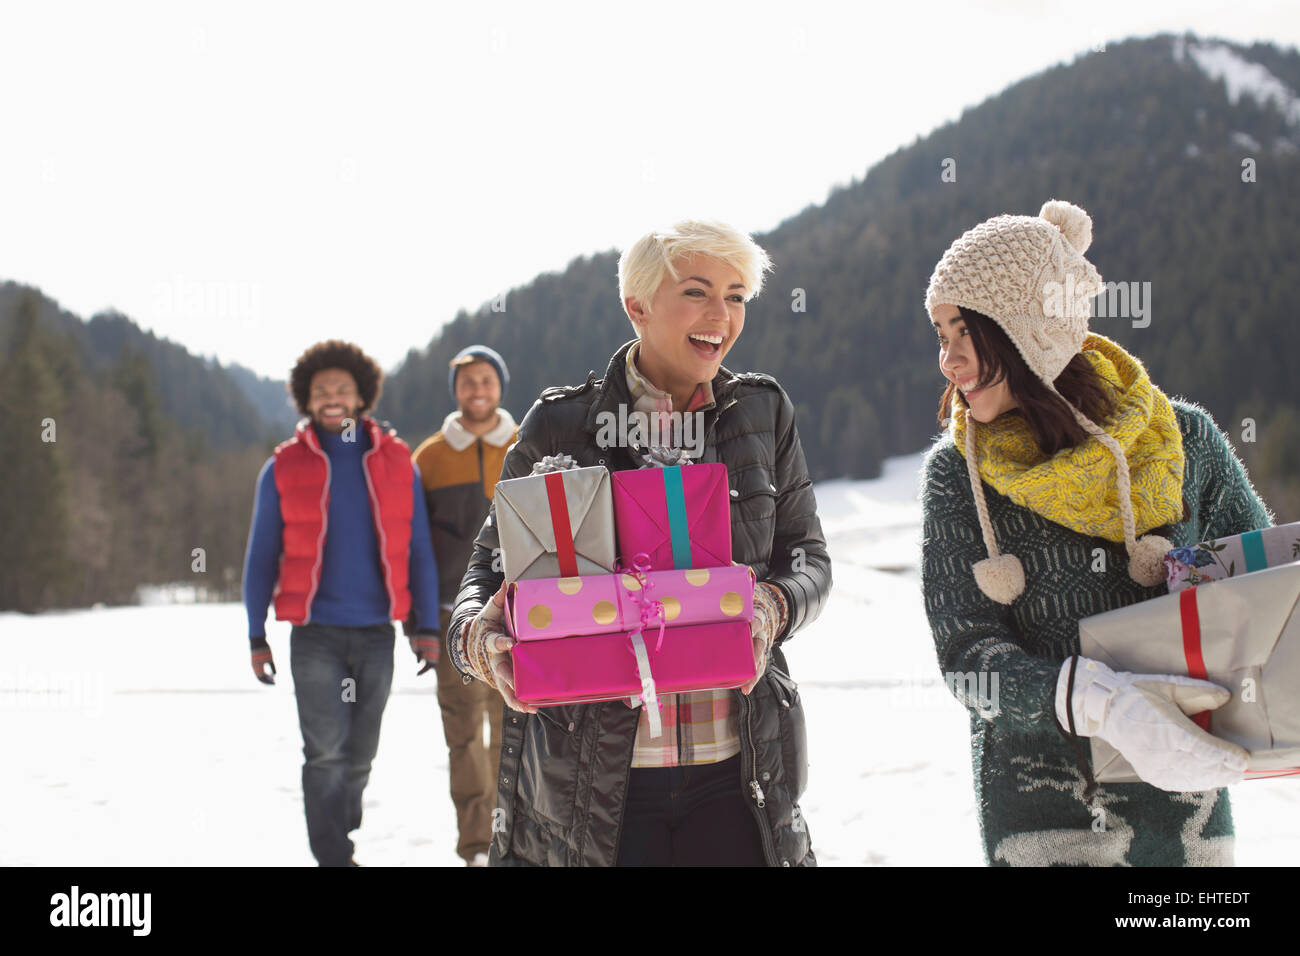 Friends carrying Christmas gifts in snow Stock Photo